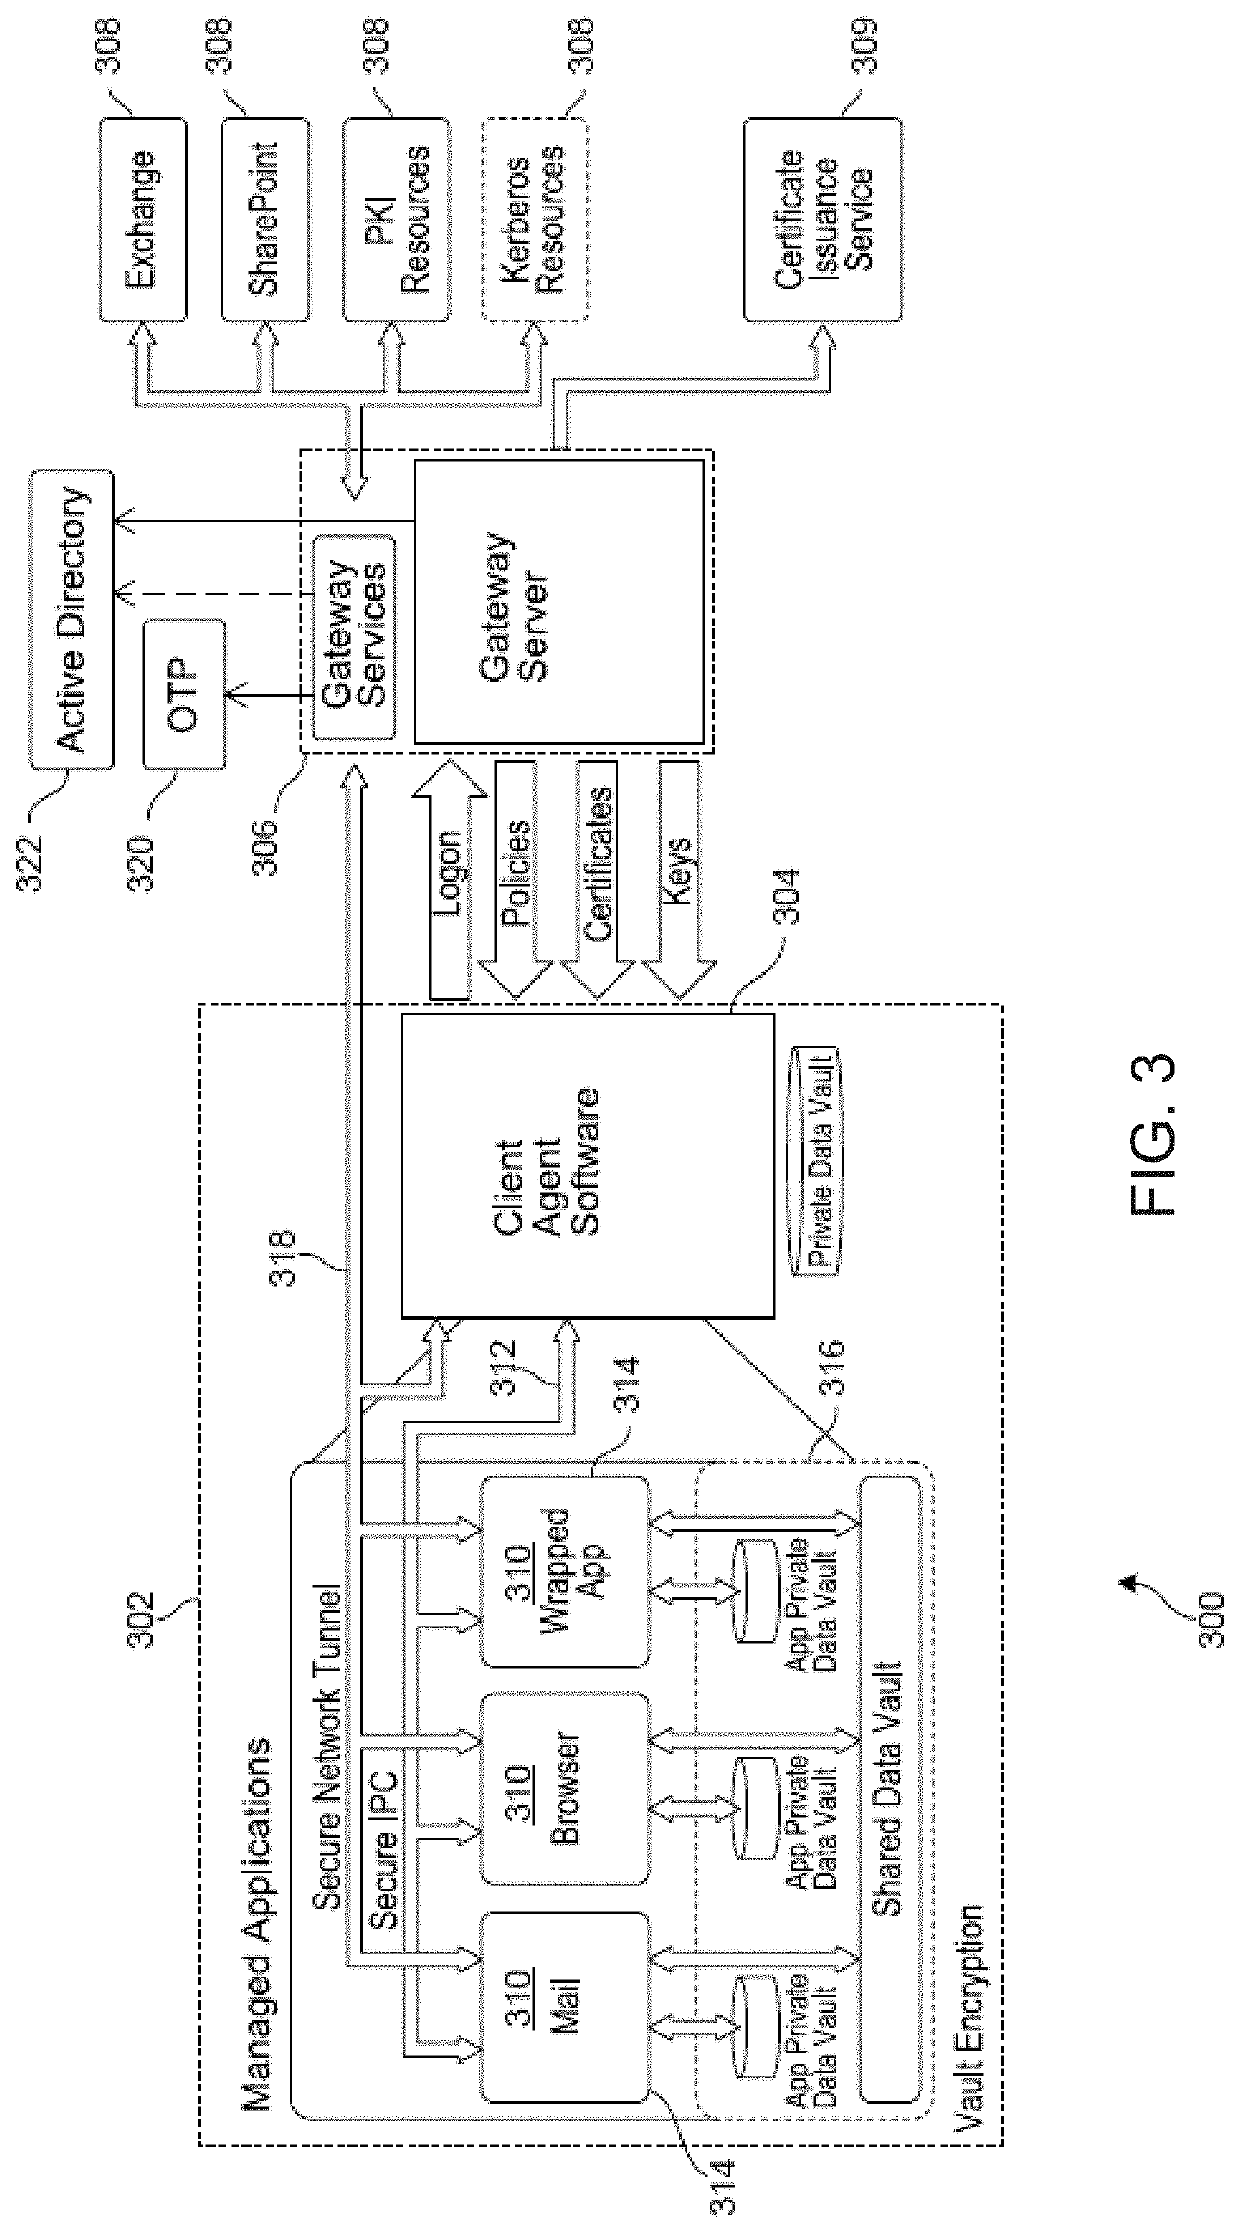 Systems and methods for transparent saas data encryption and tokenization